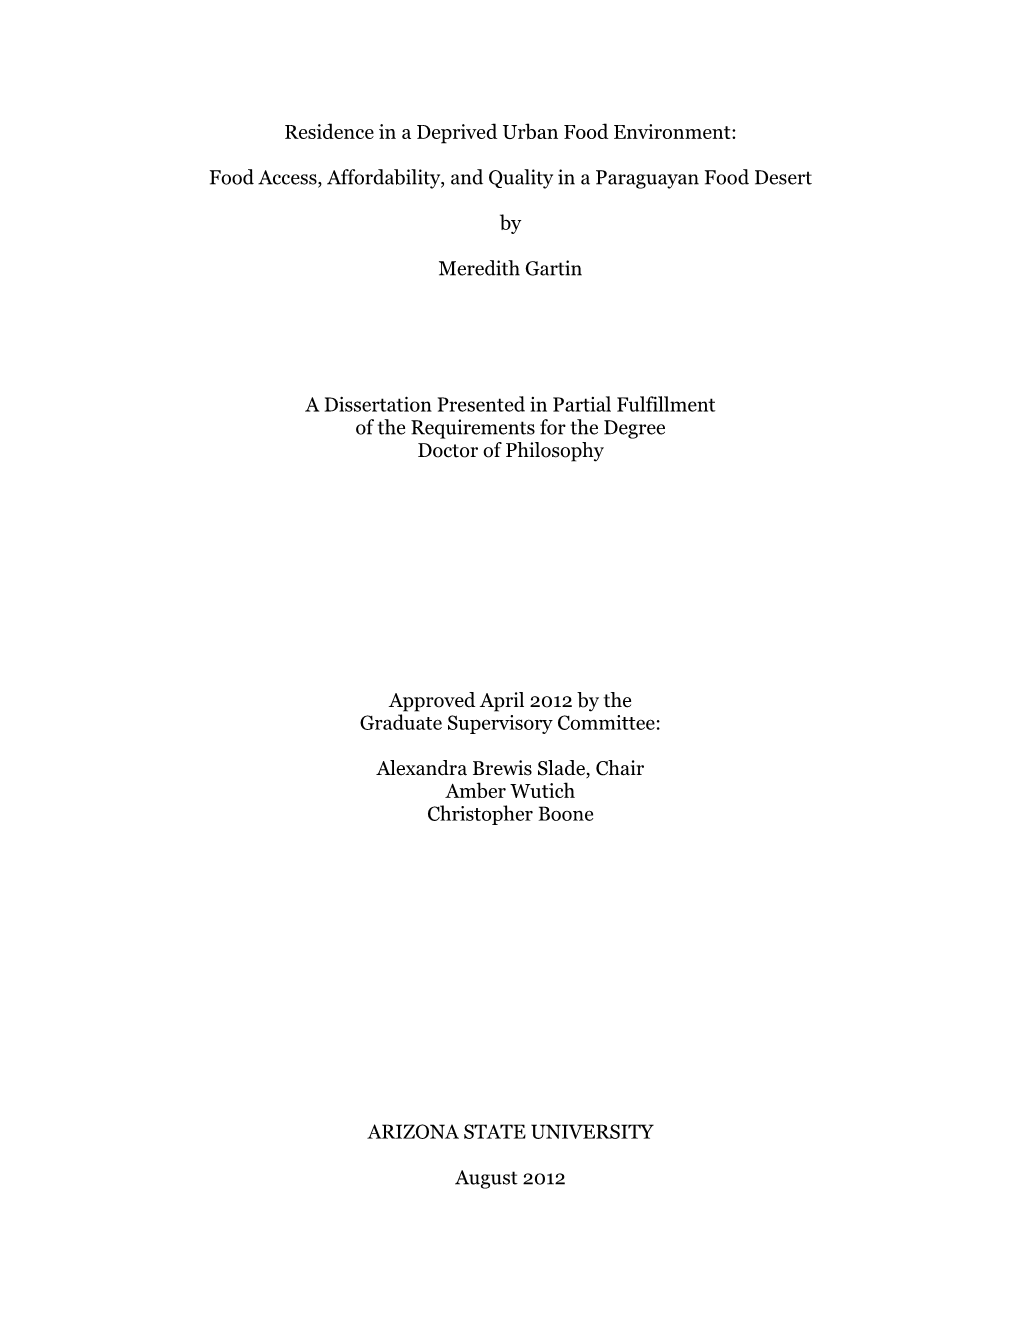 Food Access, Affordability, and Quality in a Paraguayan Food Desert by Meredit